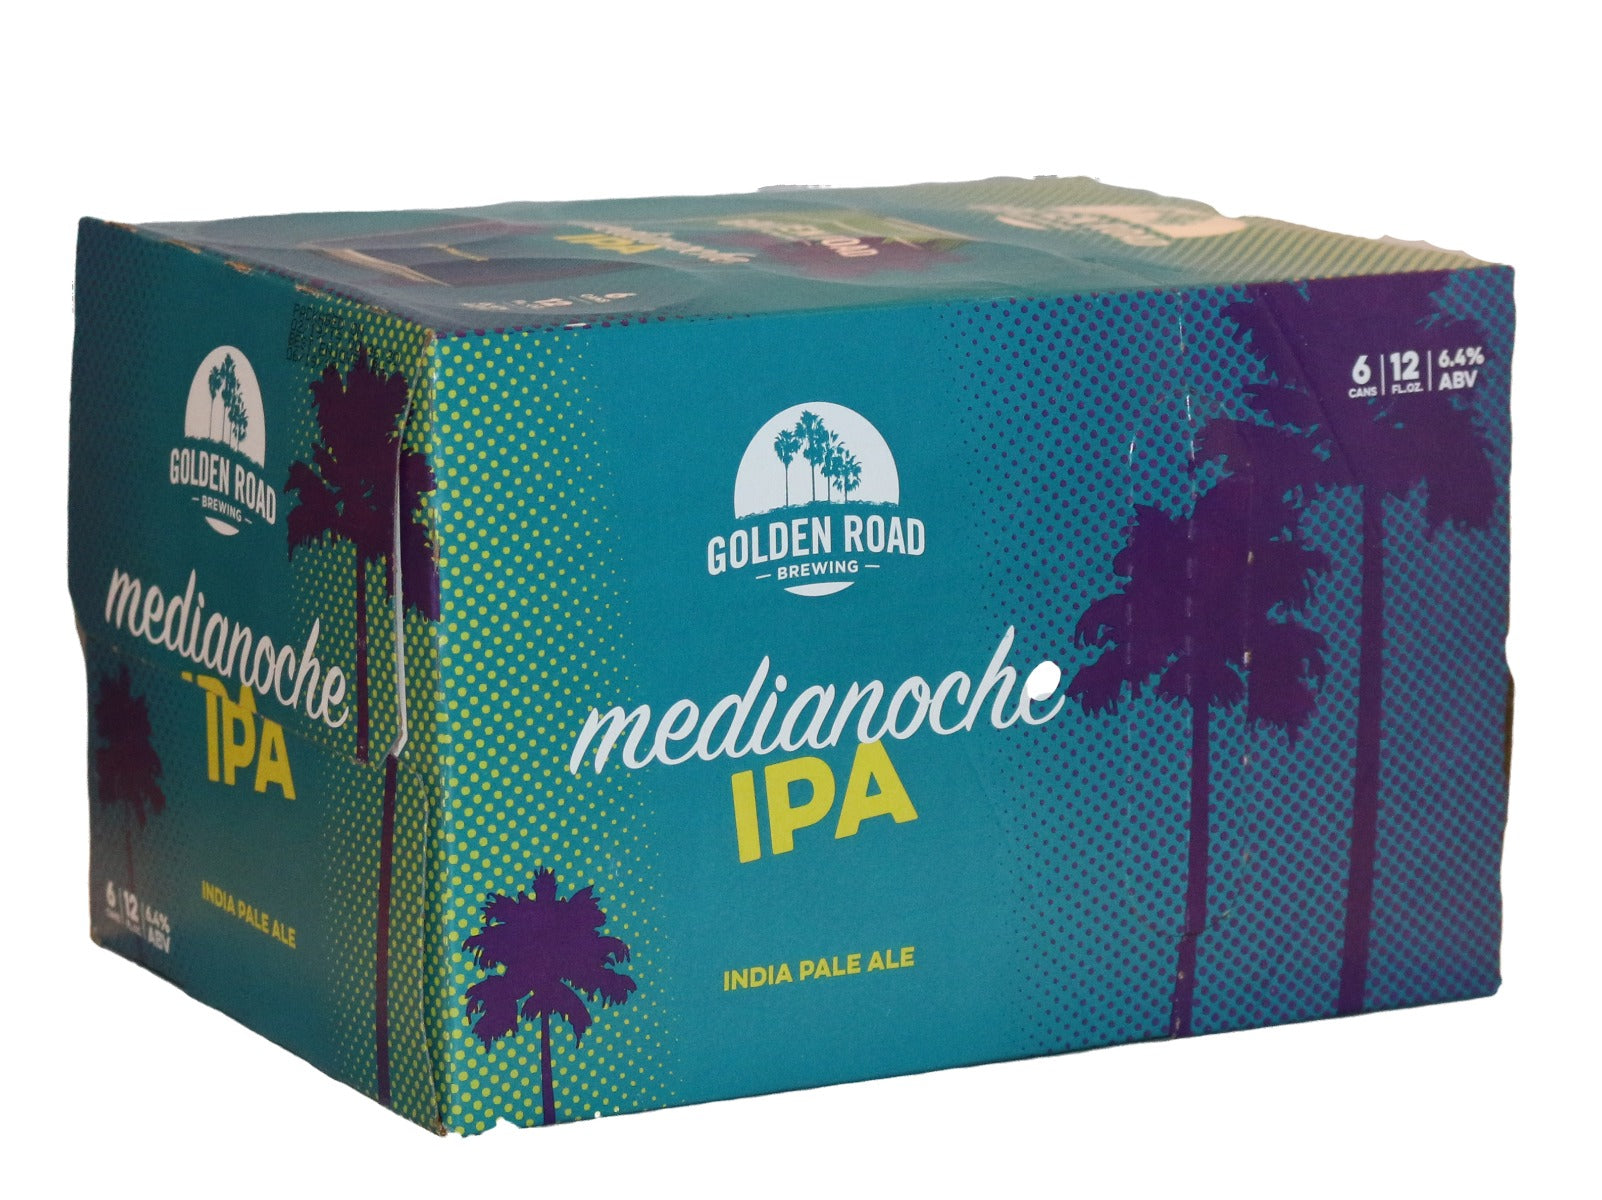 GOLDEN ROAD MEDIANOCHE IPA 6X12OZ CANS - Remedy Liquor